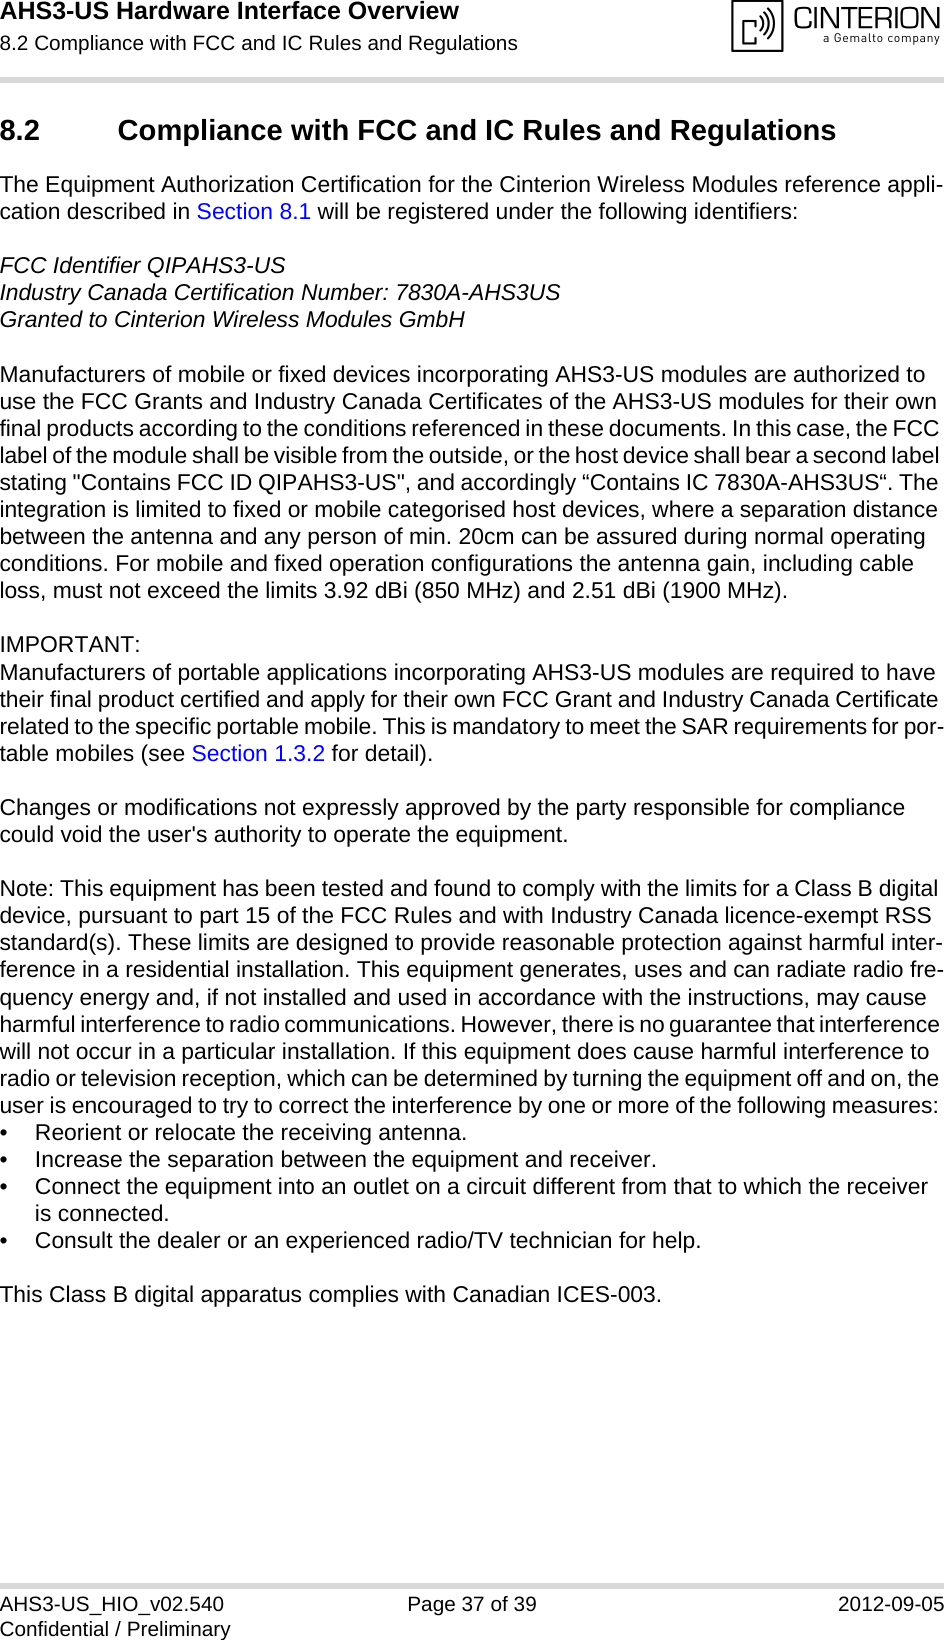 AHS3-US Hardware Interface Overview8.2 Compliance with FCC and IC Rules and Regulations37AHS3-US_HIO_v02.540 Page 37 of 39 2012-09-05Confidential / Preliminary8.2 Compliance with FCC and IC Rules and Regulations The Equipment Authorization Certification for the Cinterion Wireless Modules reference appli-cation described in Section 8.1 will be registered under the following identifiers:FCC Identifier QIPAHS3-USIndustry Canada Certification Number: 7830A-AHS3USGranted to Cinterion Wireless Modules GmbH Manufacturers of mobile or fixed devices incorporating AHS3-US modules are authorized to use the FCC Grants and Industry Canada Certificates of the AHS3-US modules for their own final products according to the conditions referenced in these documents. In this case, the FCC label of the module shall be visible from the outside, or the host device shall bear a second label stating &quot;Contains FCC ID QIPAHS3-US&quot;, and accordingly “Contains IC 7830A-AHS3US“. The integration is limited to fixed or mobile categorised host devices, where a separation distance between the antenna and any person of min. 20cm can be assured during normal operating conditions. For mobile and fixed operation configurations the antenna gain, including cable loss, must not exceed the limits 3.92 dBi (850 MHz) and 2.51 dBi (1900 MHz).IMPORTANT:Manufacturers of portable applications incorporating AHS3-US modules are required to have their final product certified and apply for their own FCC Grant and Industry Canada Certificate related to the specific portable mobile. This is mandatory to meet the SAR requirements for por-table mobiles (see Section 1.3.2 for detail).Changes or modifications not expressly approved by the party responsible for compliance could void the user&apos;s authority to operate the equipment.Note: This equipment has been tested and found to comply with the limits for a Class B digital device, pursuant to part 15 of the FCC Rules and with Industry Canada licence-exempt RSS standard(s). These limits are designed to provide reasonable protection against harmful inter-ference in a residential installation. This equipment generates, uses and can radiate radio fre-quency energy and, if not installed and used in accordance with the instructions, may cause harmful interference to radio communications. However, there is no guarantee that interference will not occur in a particular installation. If this equipment does cause harmful interference to radio or television reception, which can be determined by turning the equipment off and on, the user is encouraged to try to correct the interference by one or more of the following measures: • Reorient or relocate the receiving antenna. • Increase the separation between the equipment and receiver. • Connect the equipment into an outlet on a circuit different from that to which the receiver is connected. • Consult the dealer or an experienced radio/TV technician for help.This Class B digital apparatus complies with Canadian ICES-003.